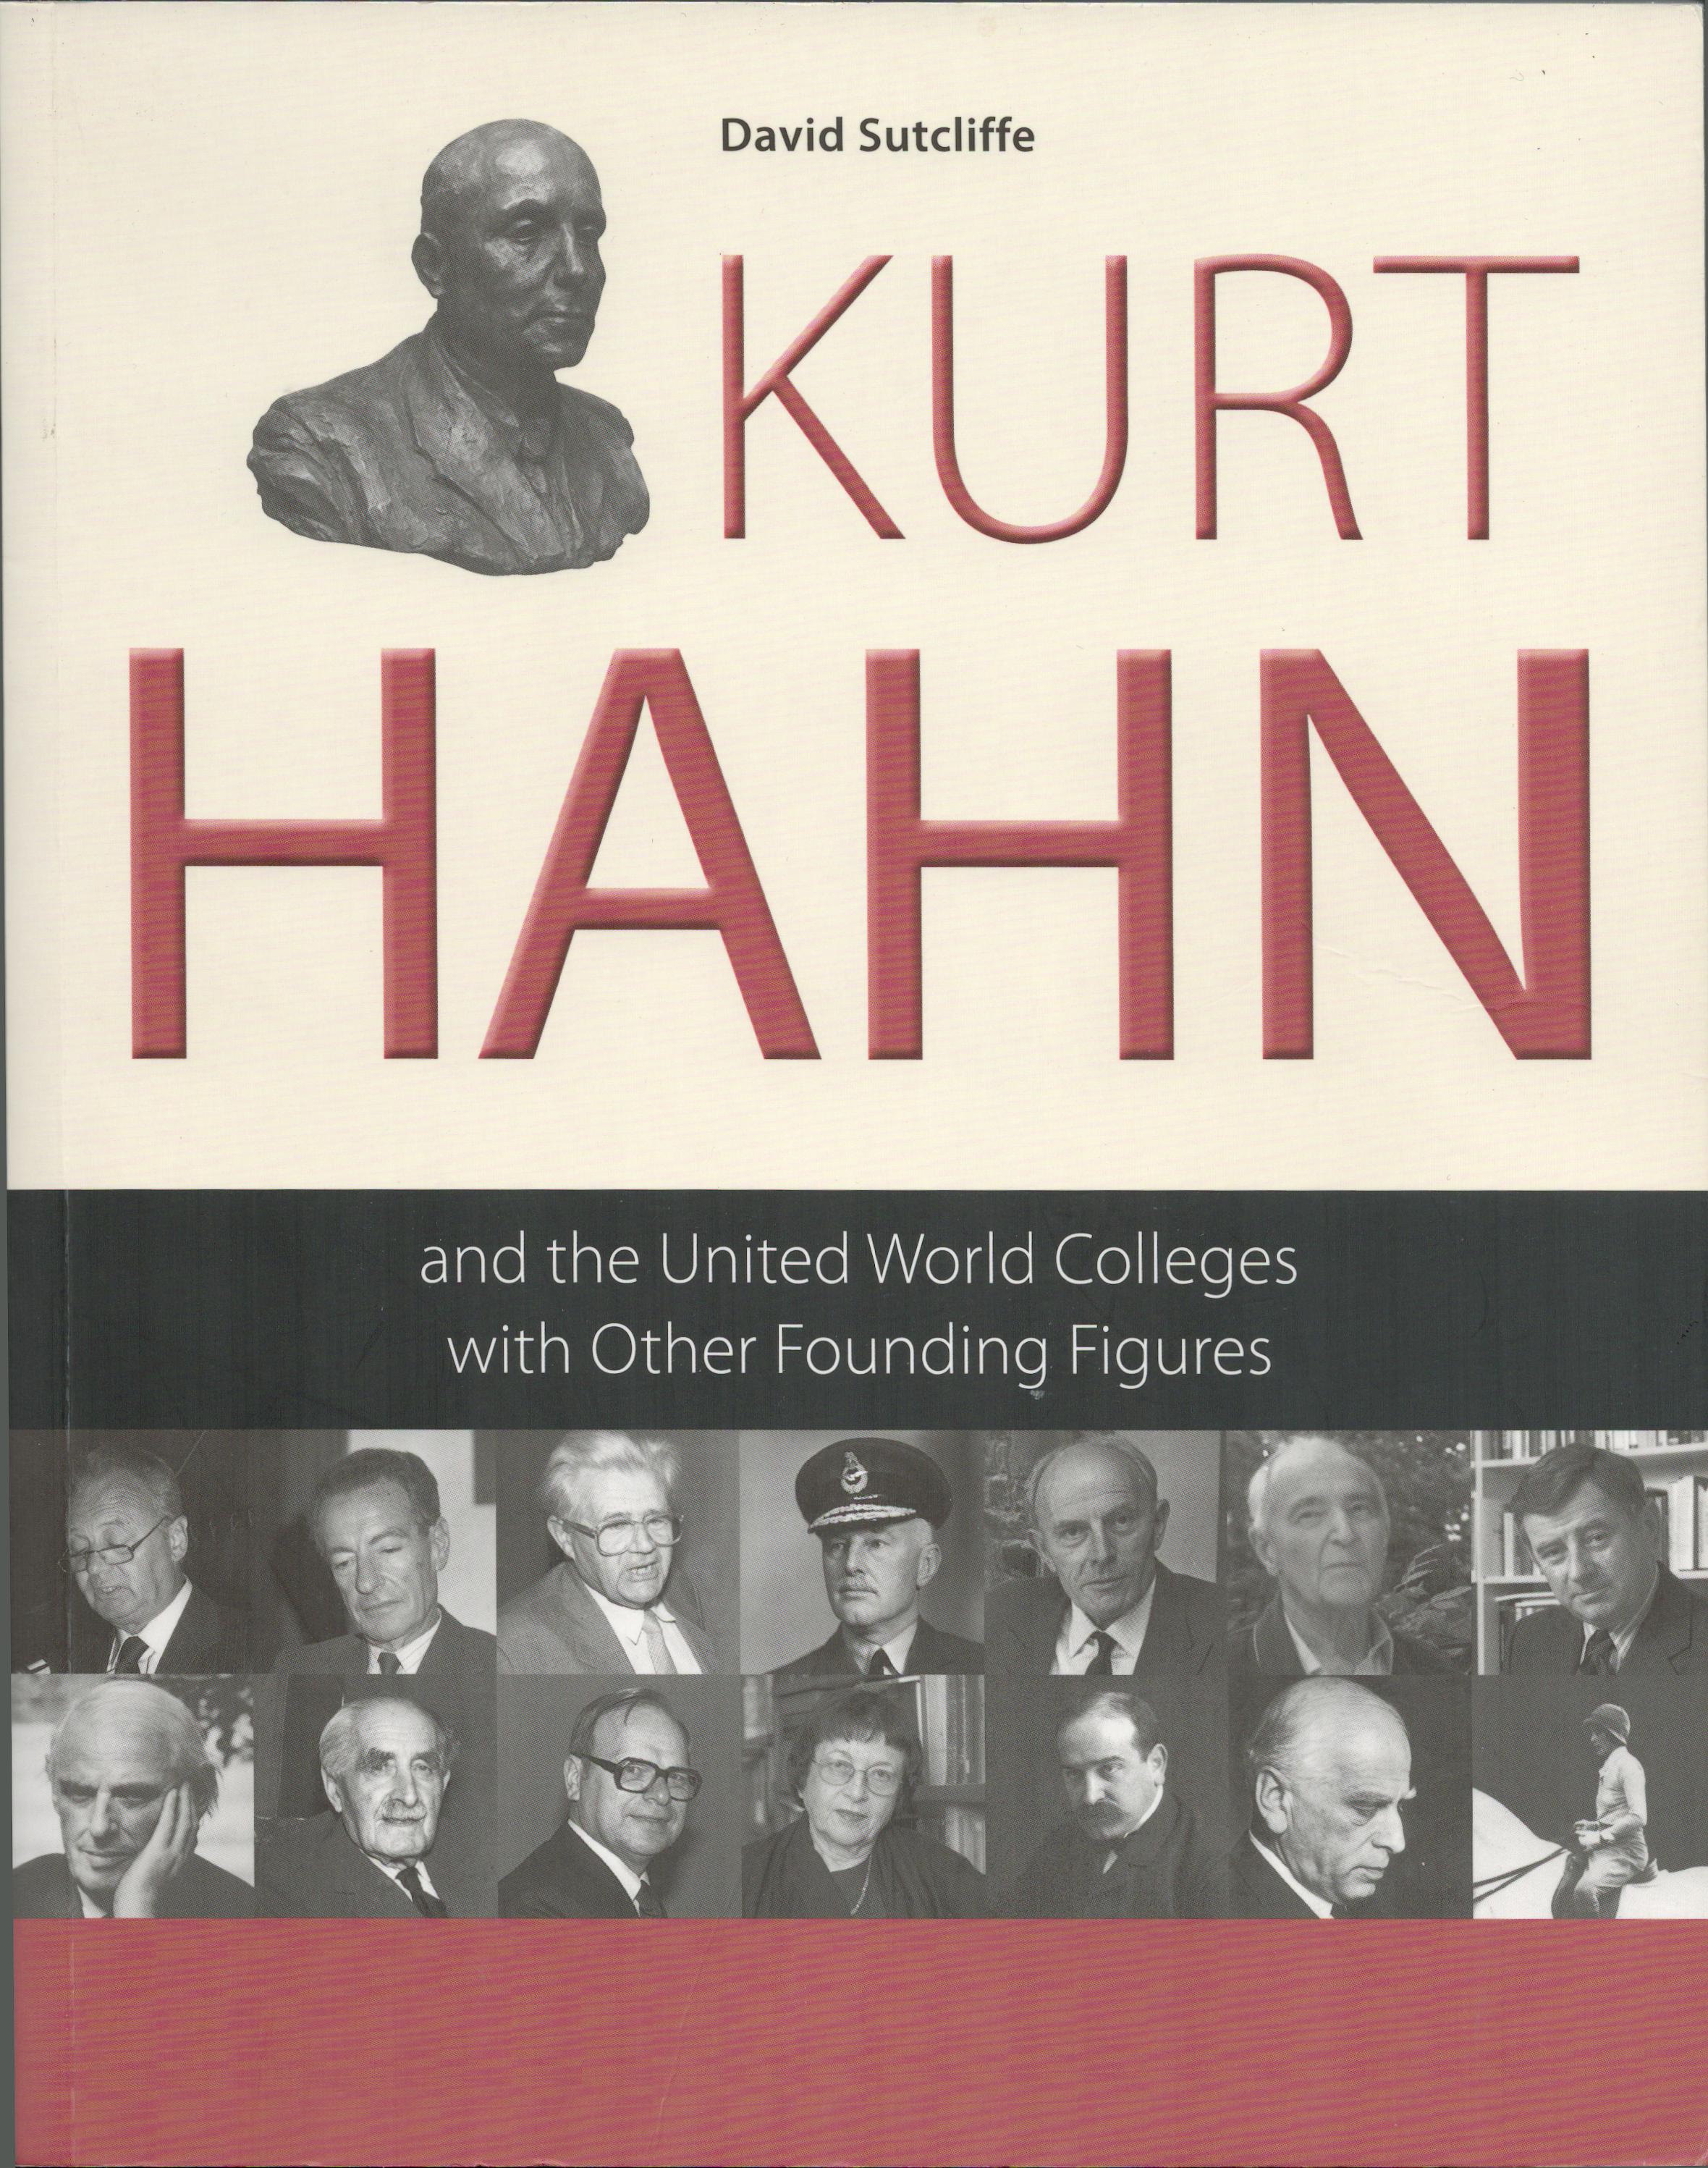 Kurt Hahn and the United World Colleges with Other Founding Figures. - SUTCLIFFE, David.